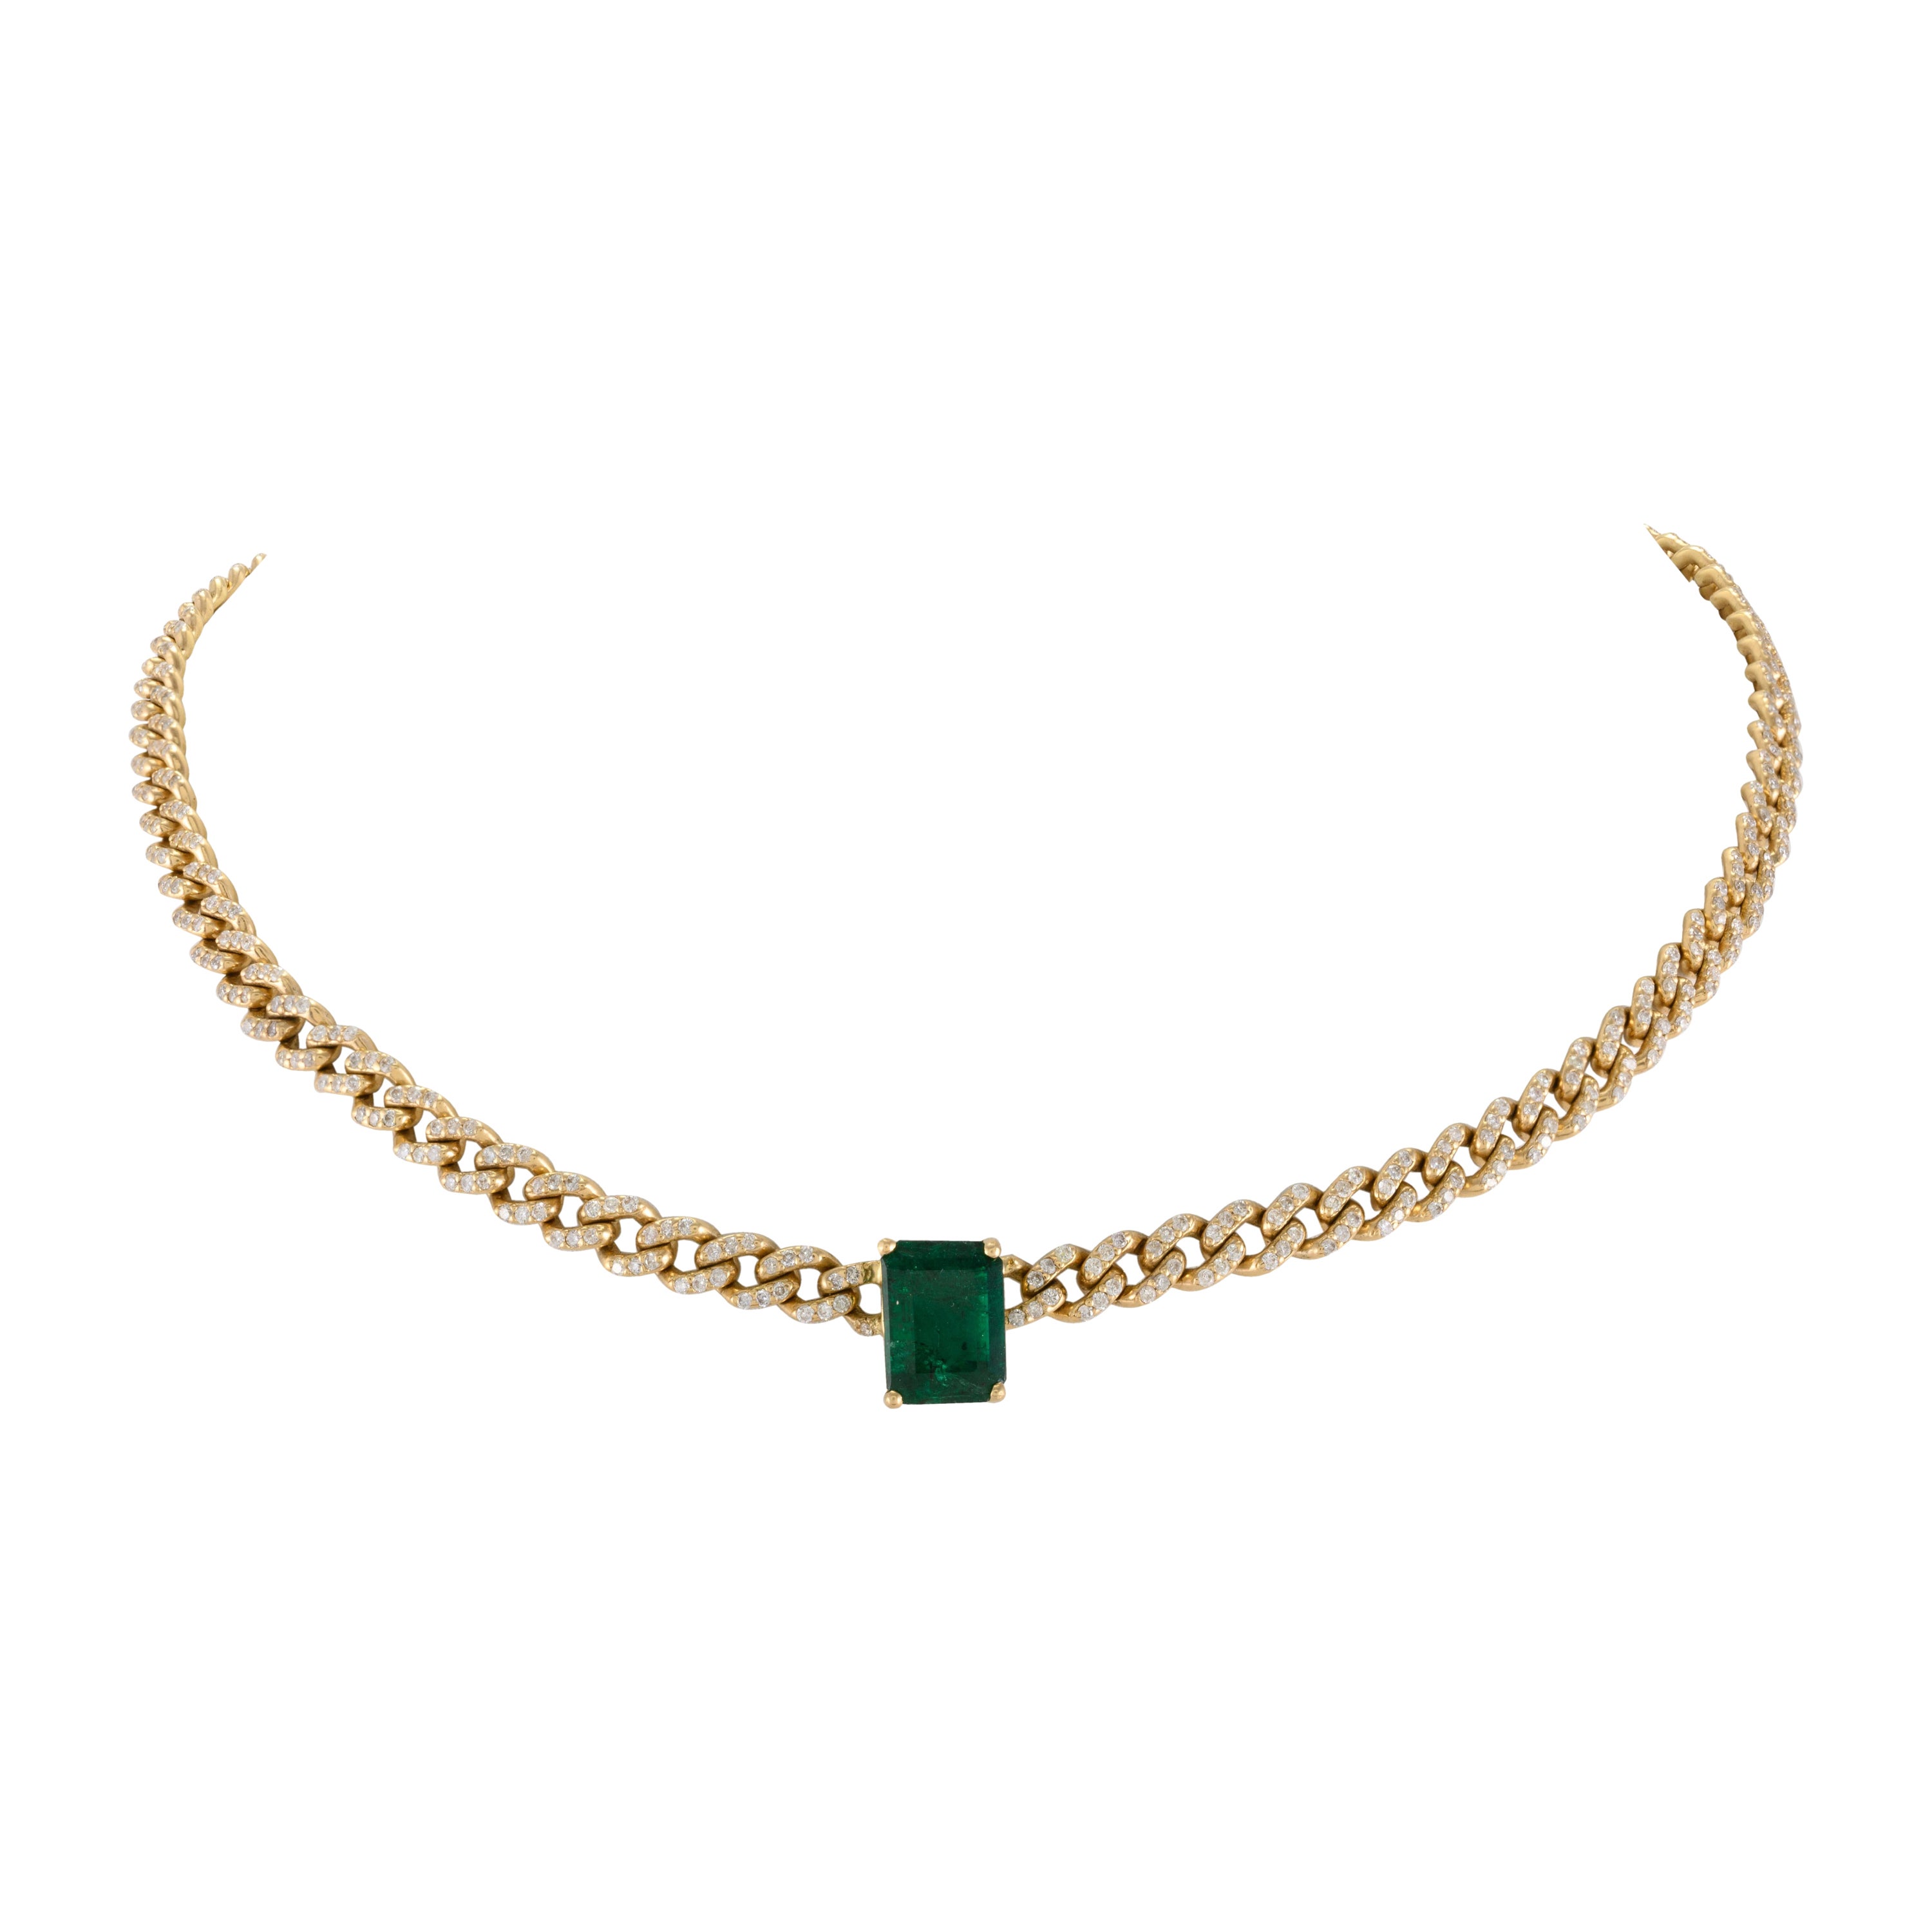 Genuine Emerald and Diamond Curb Chain Choker Necklace in 18k Solid Yellow Gold